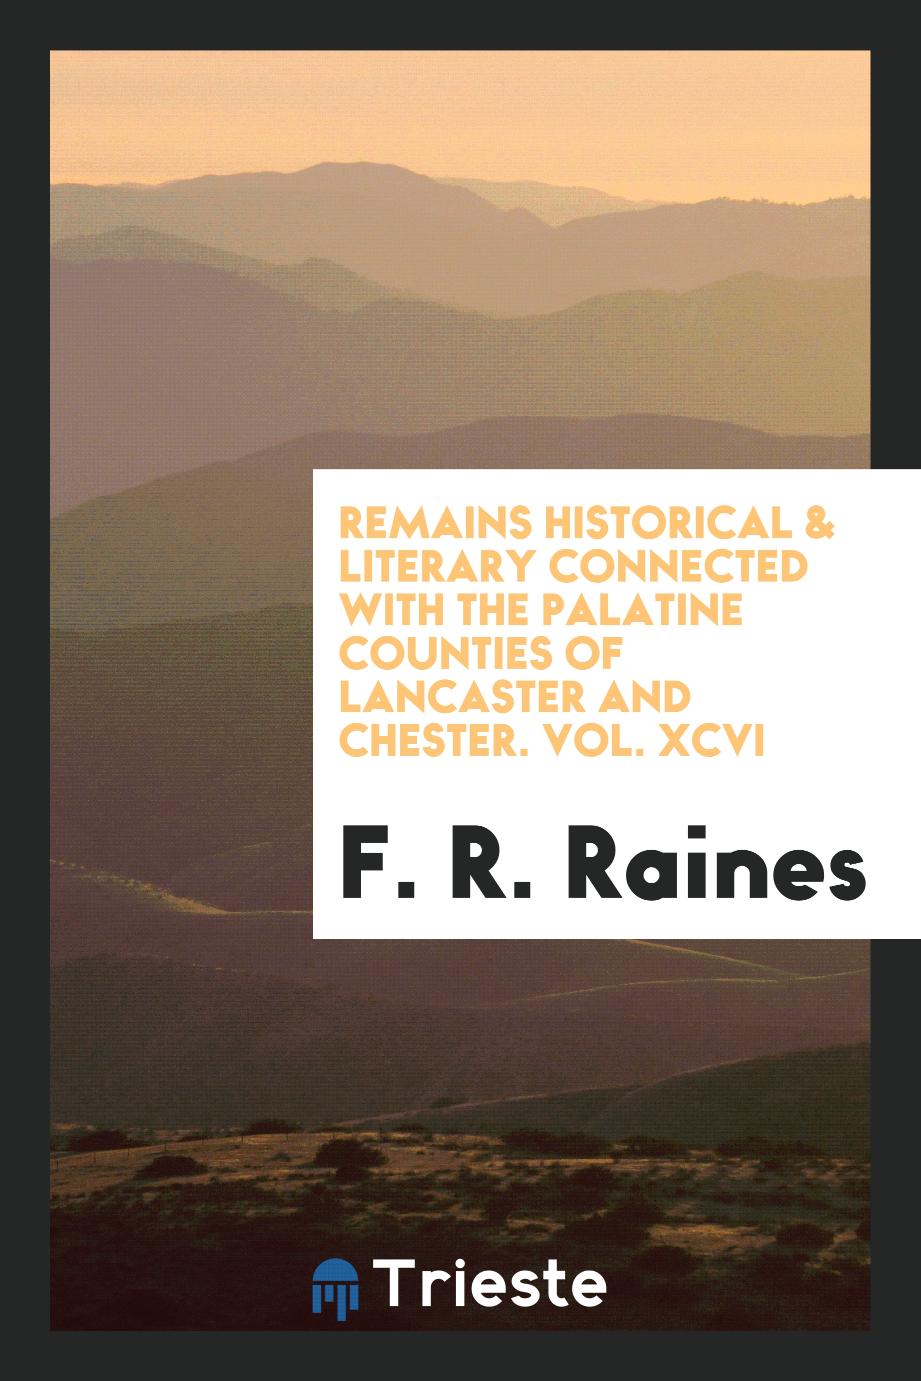 Remains Historical & Literary Connected with the Palatine Counties of Lancaster and Chester. Vol. XCVI